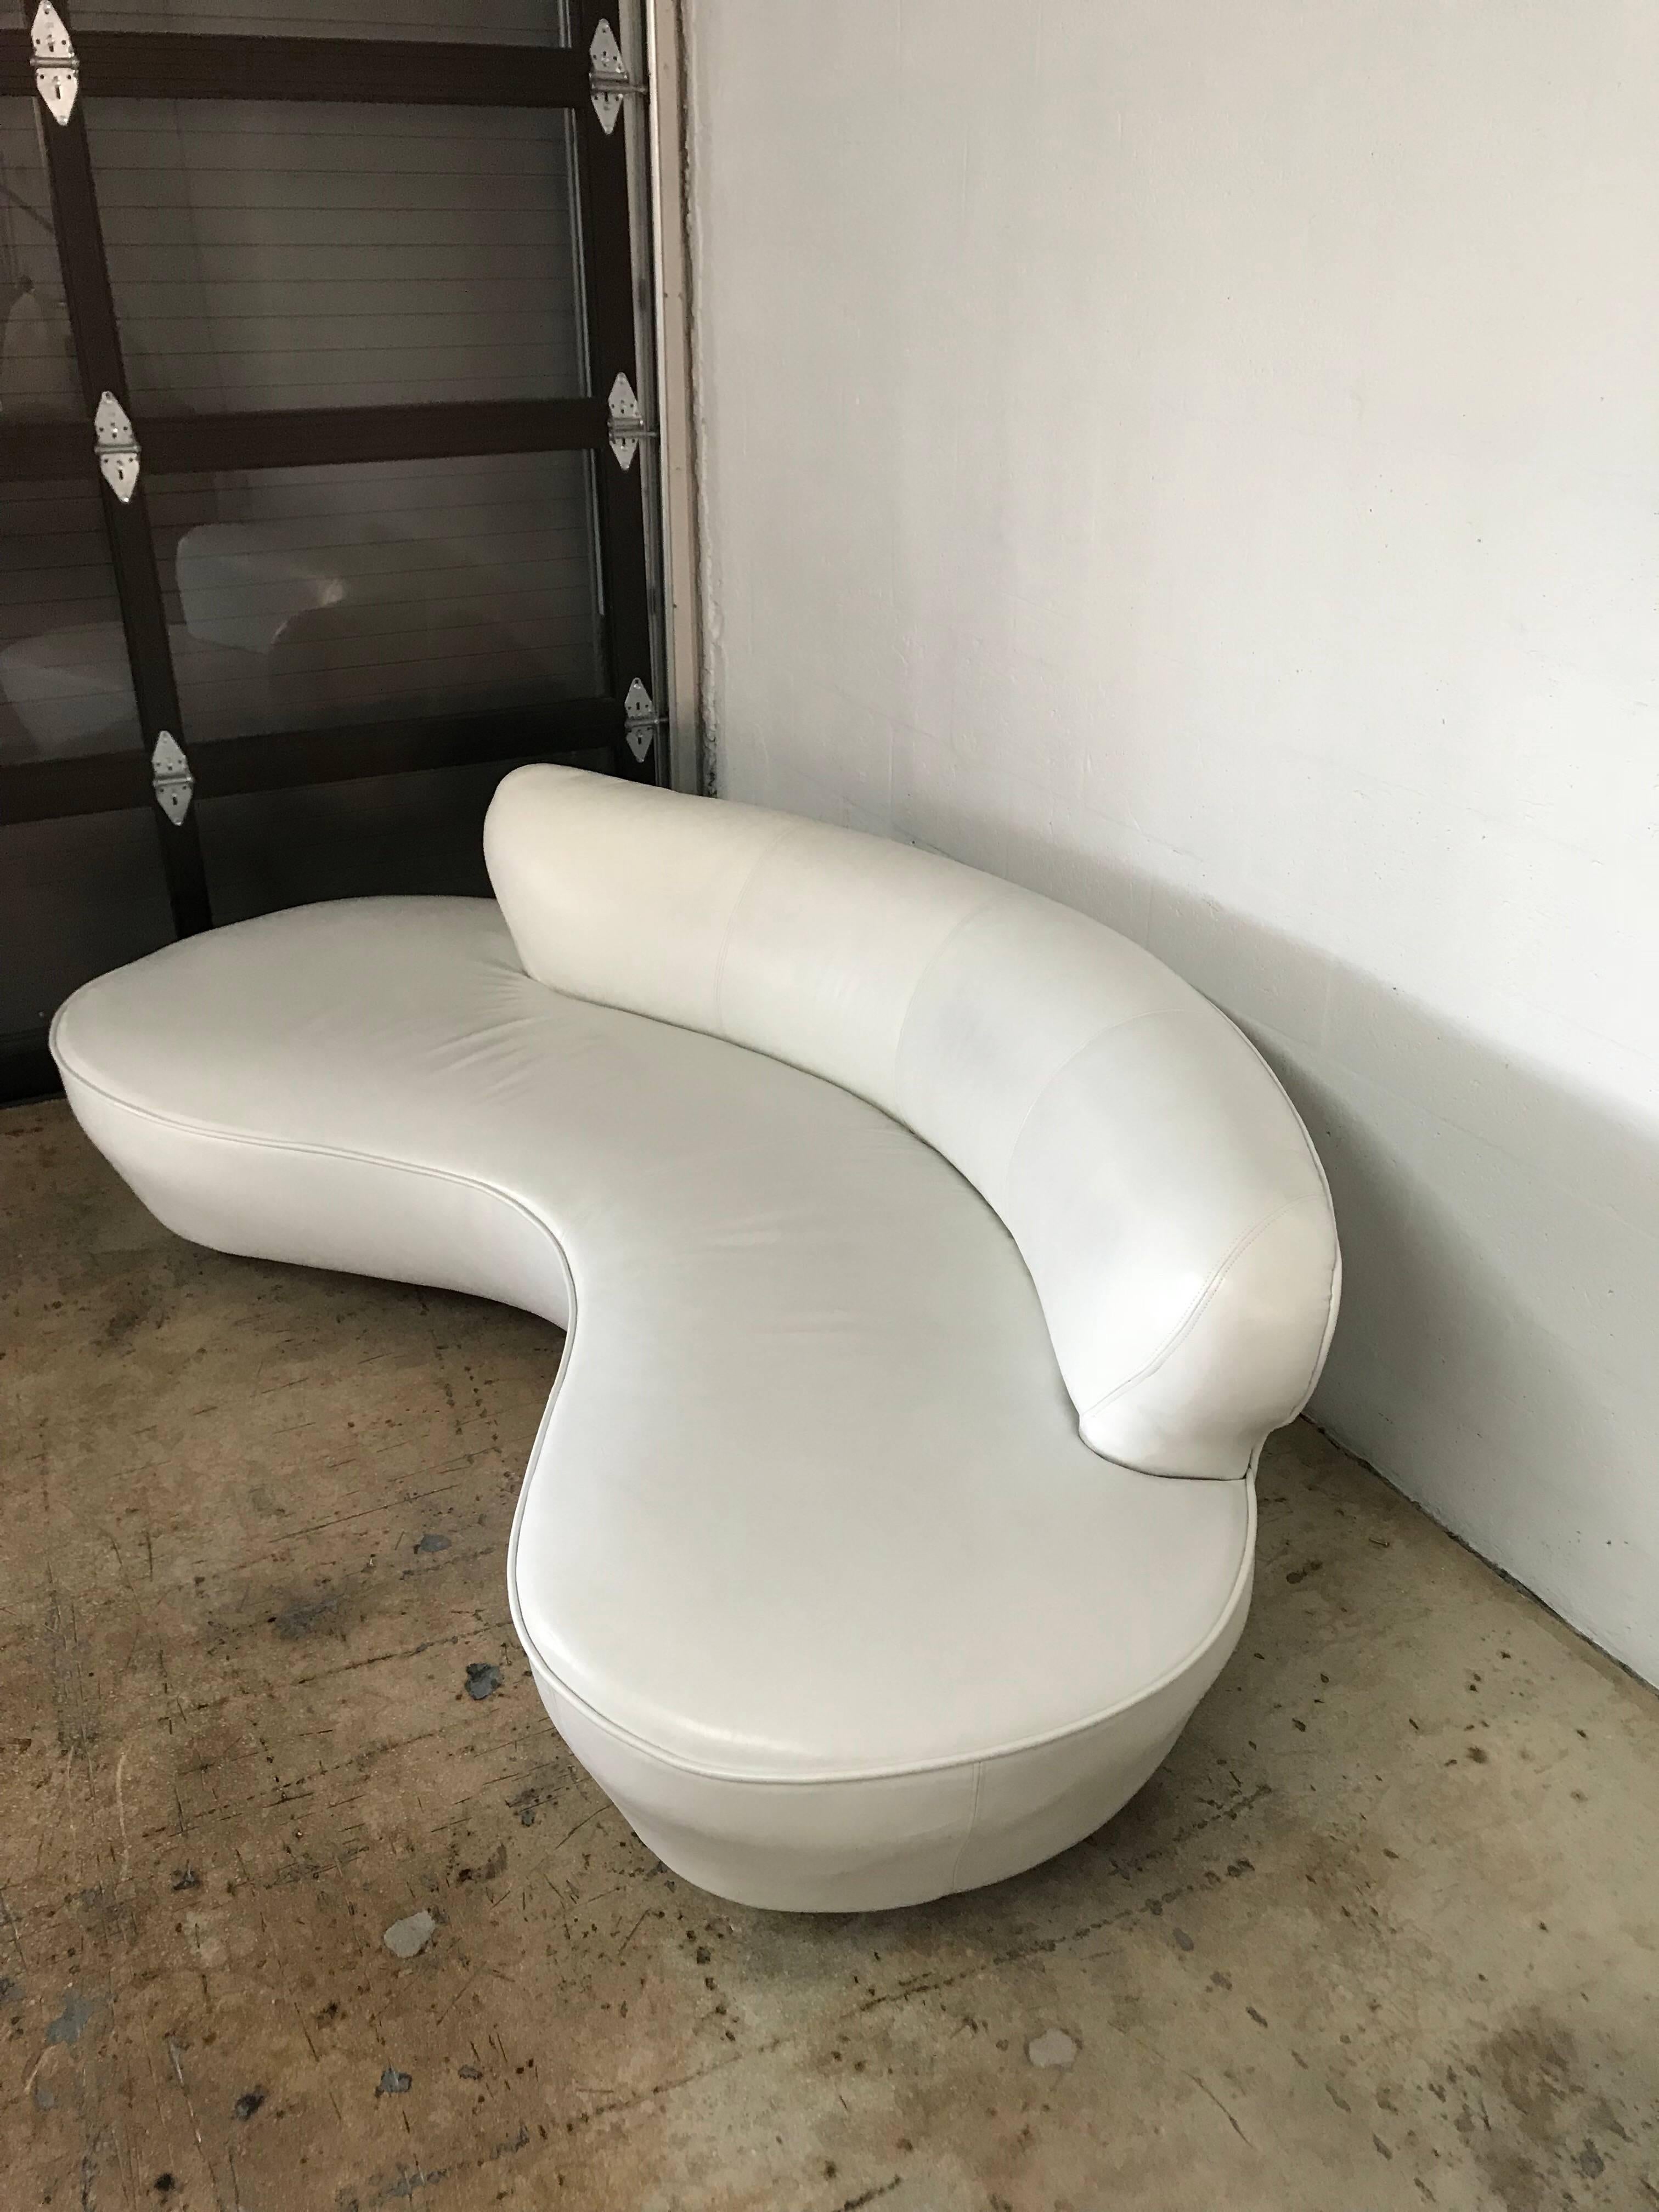 Original white leather serpentine sofa designed by Vladimir Kagan for Directional, base consist of two white leather wrapped pedestals and Lucite center support.